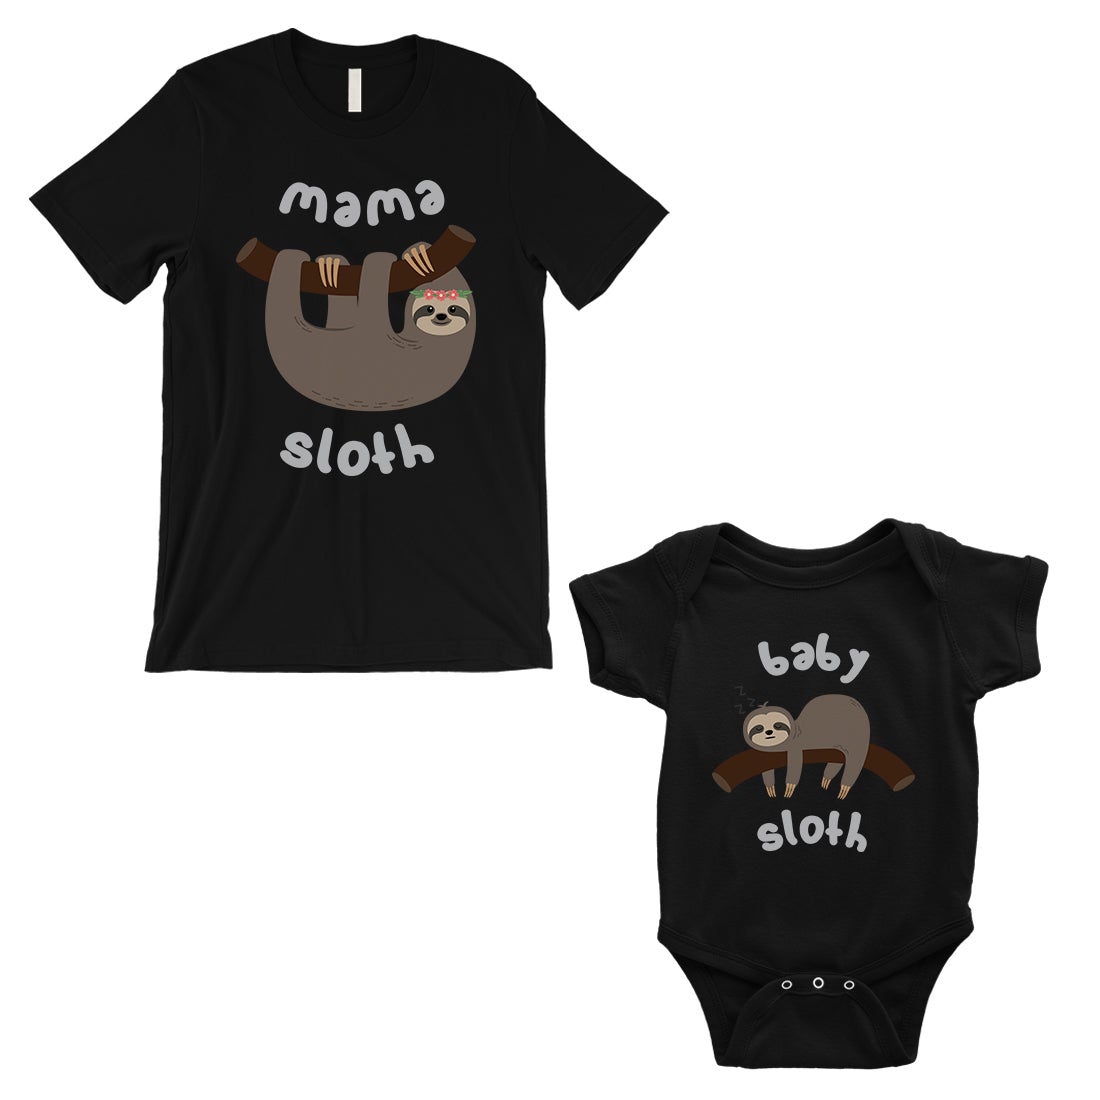 Mama Baby Sloth Mom and Baby Matching Shirts Black For Mother's Day Black